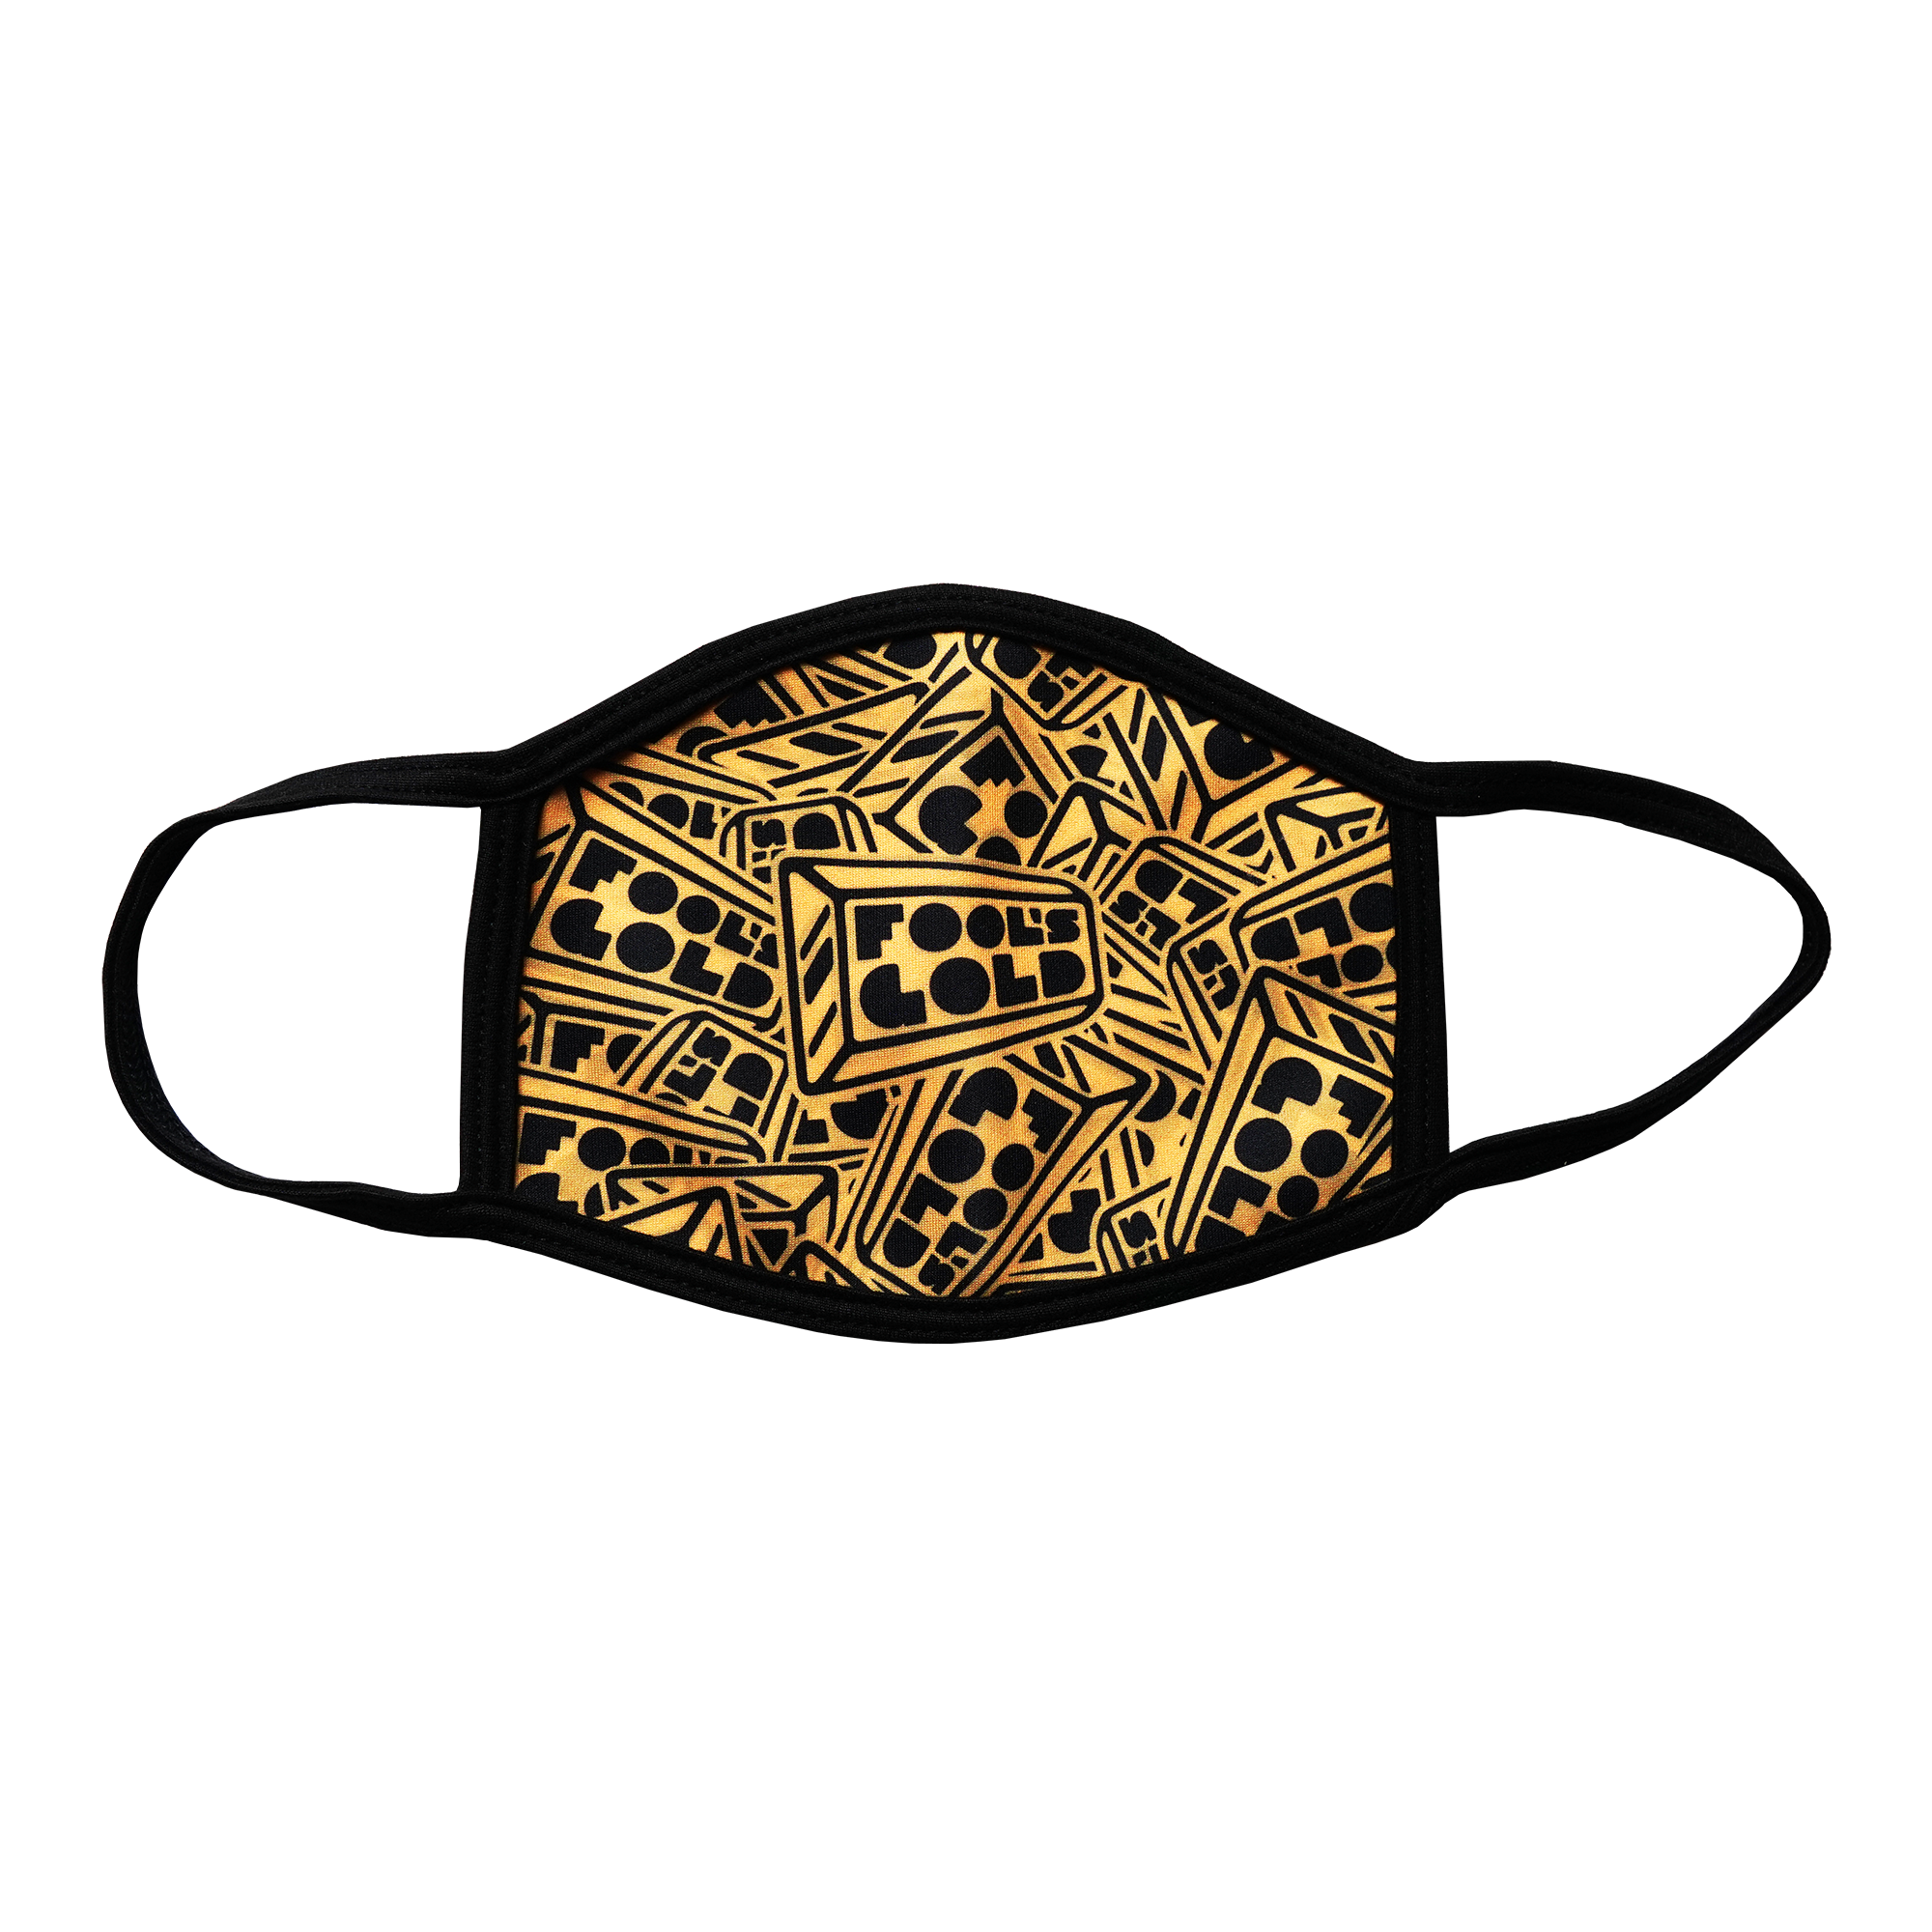 Fool's Gold "All Over" Mask